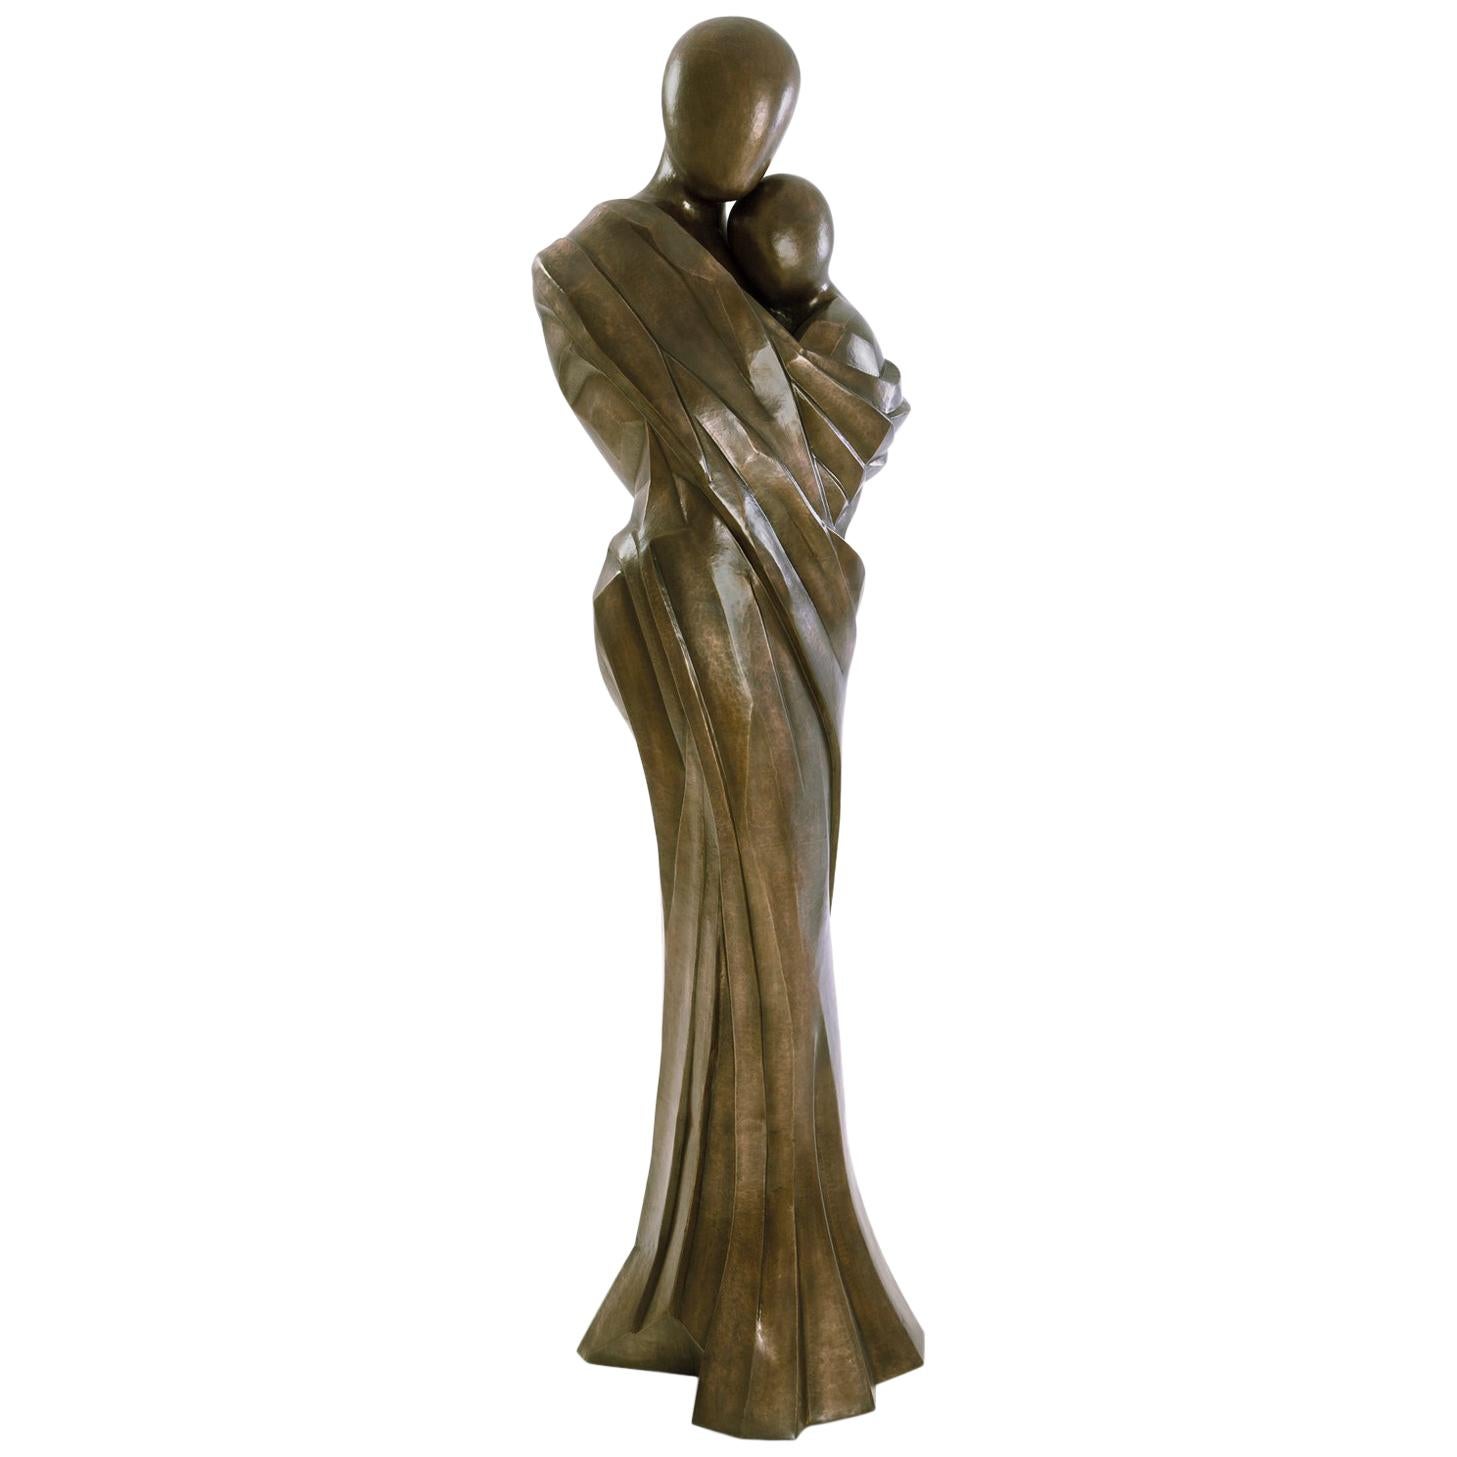 Woman and Child Life-Size Sculpture in Solid Brass For Sale